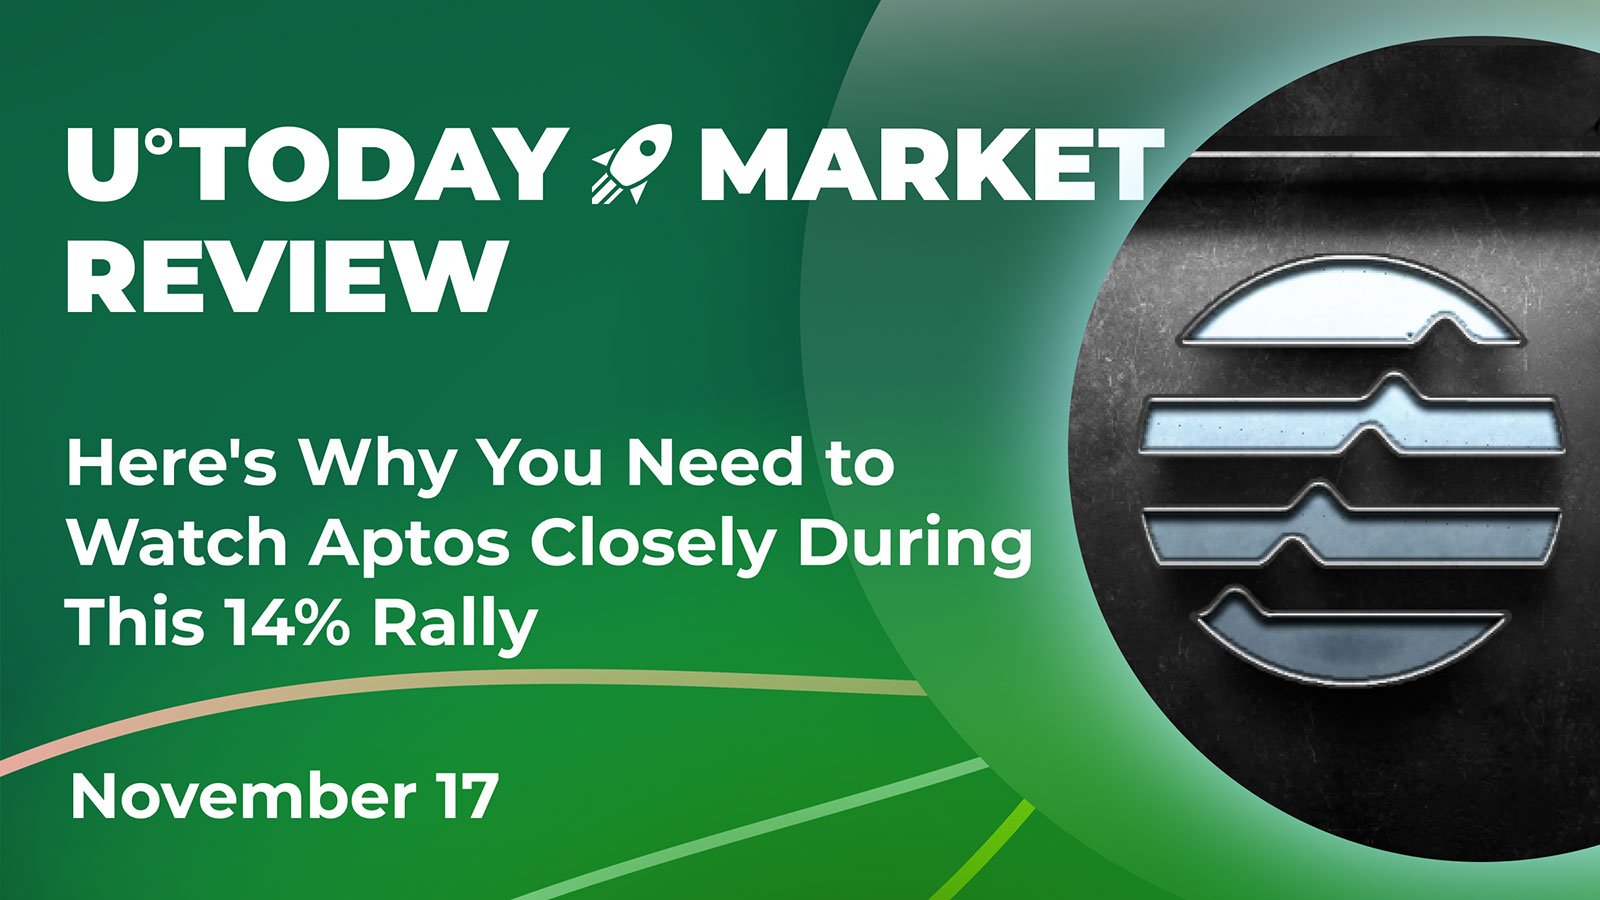 here-s-why-you-need-to-watch-aptos-closely-during-this-14-rally-crypto-market-review-nov-17